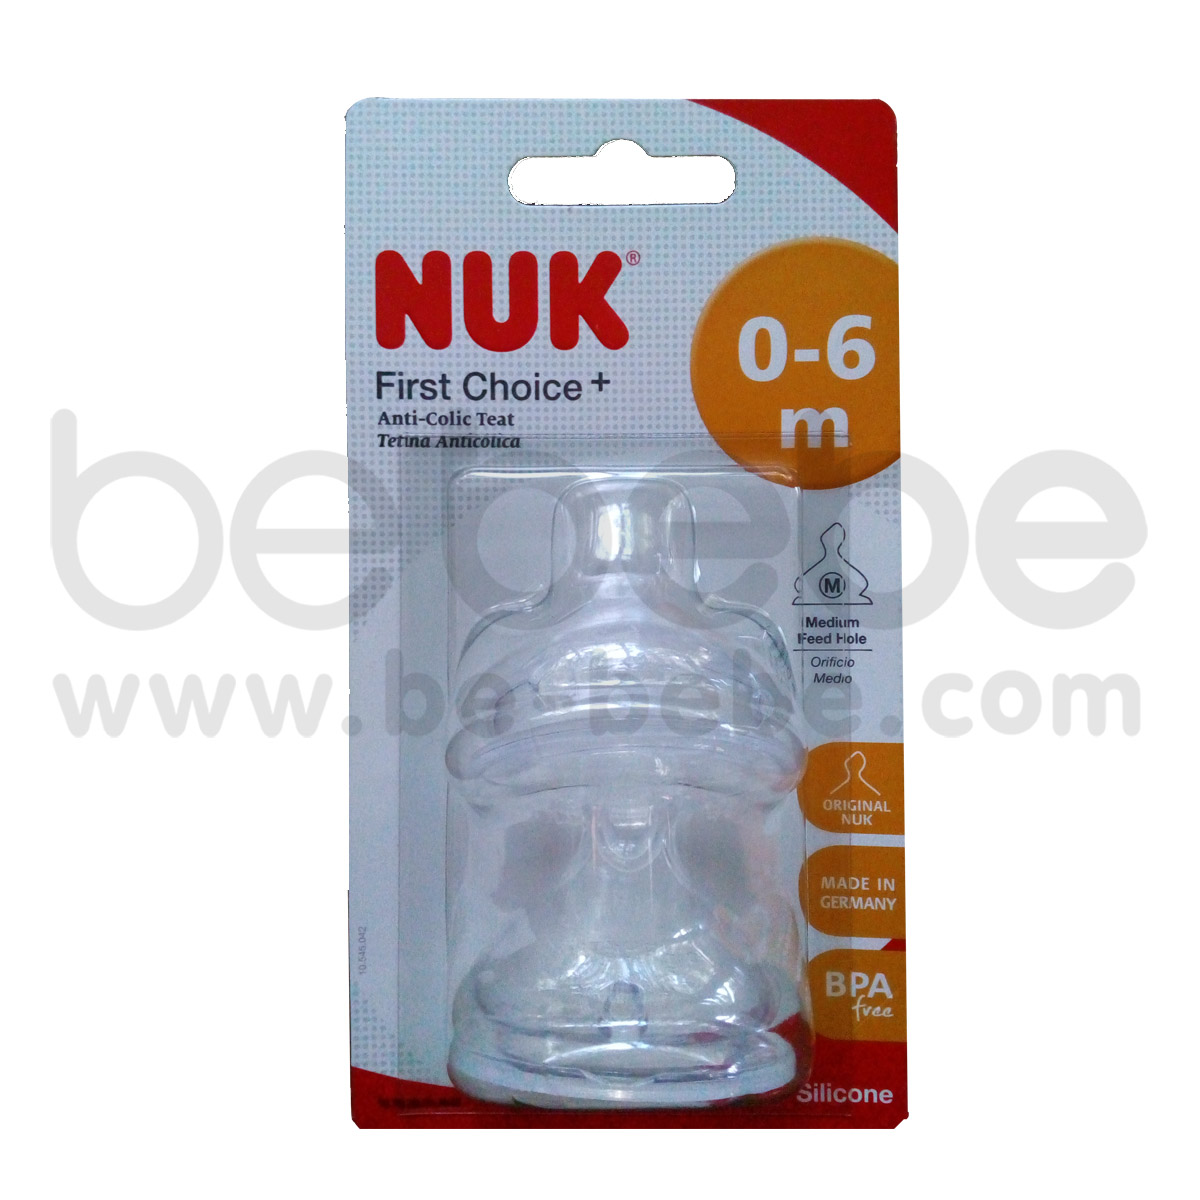 NUK:First Choice + Silicone Teat (M) 0-6 m. 